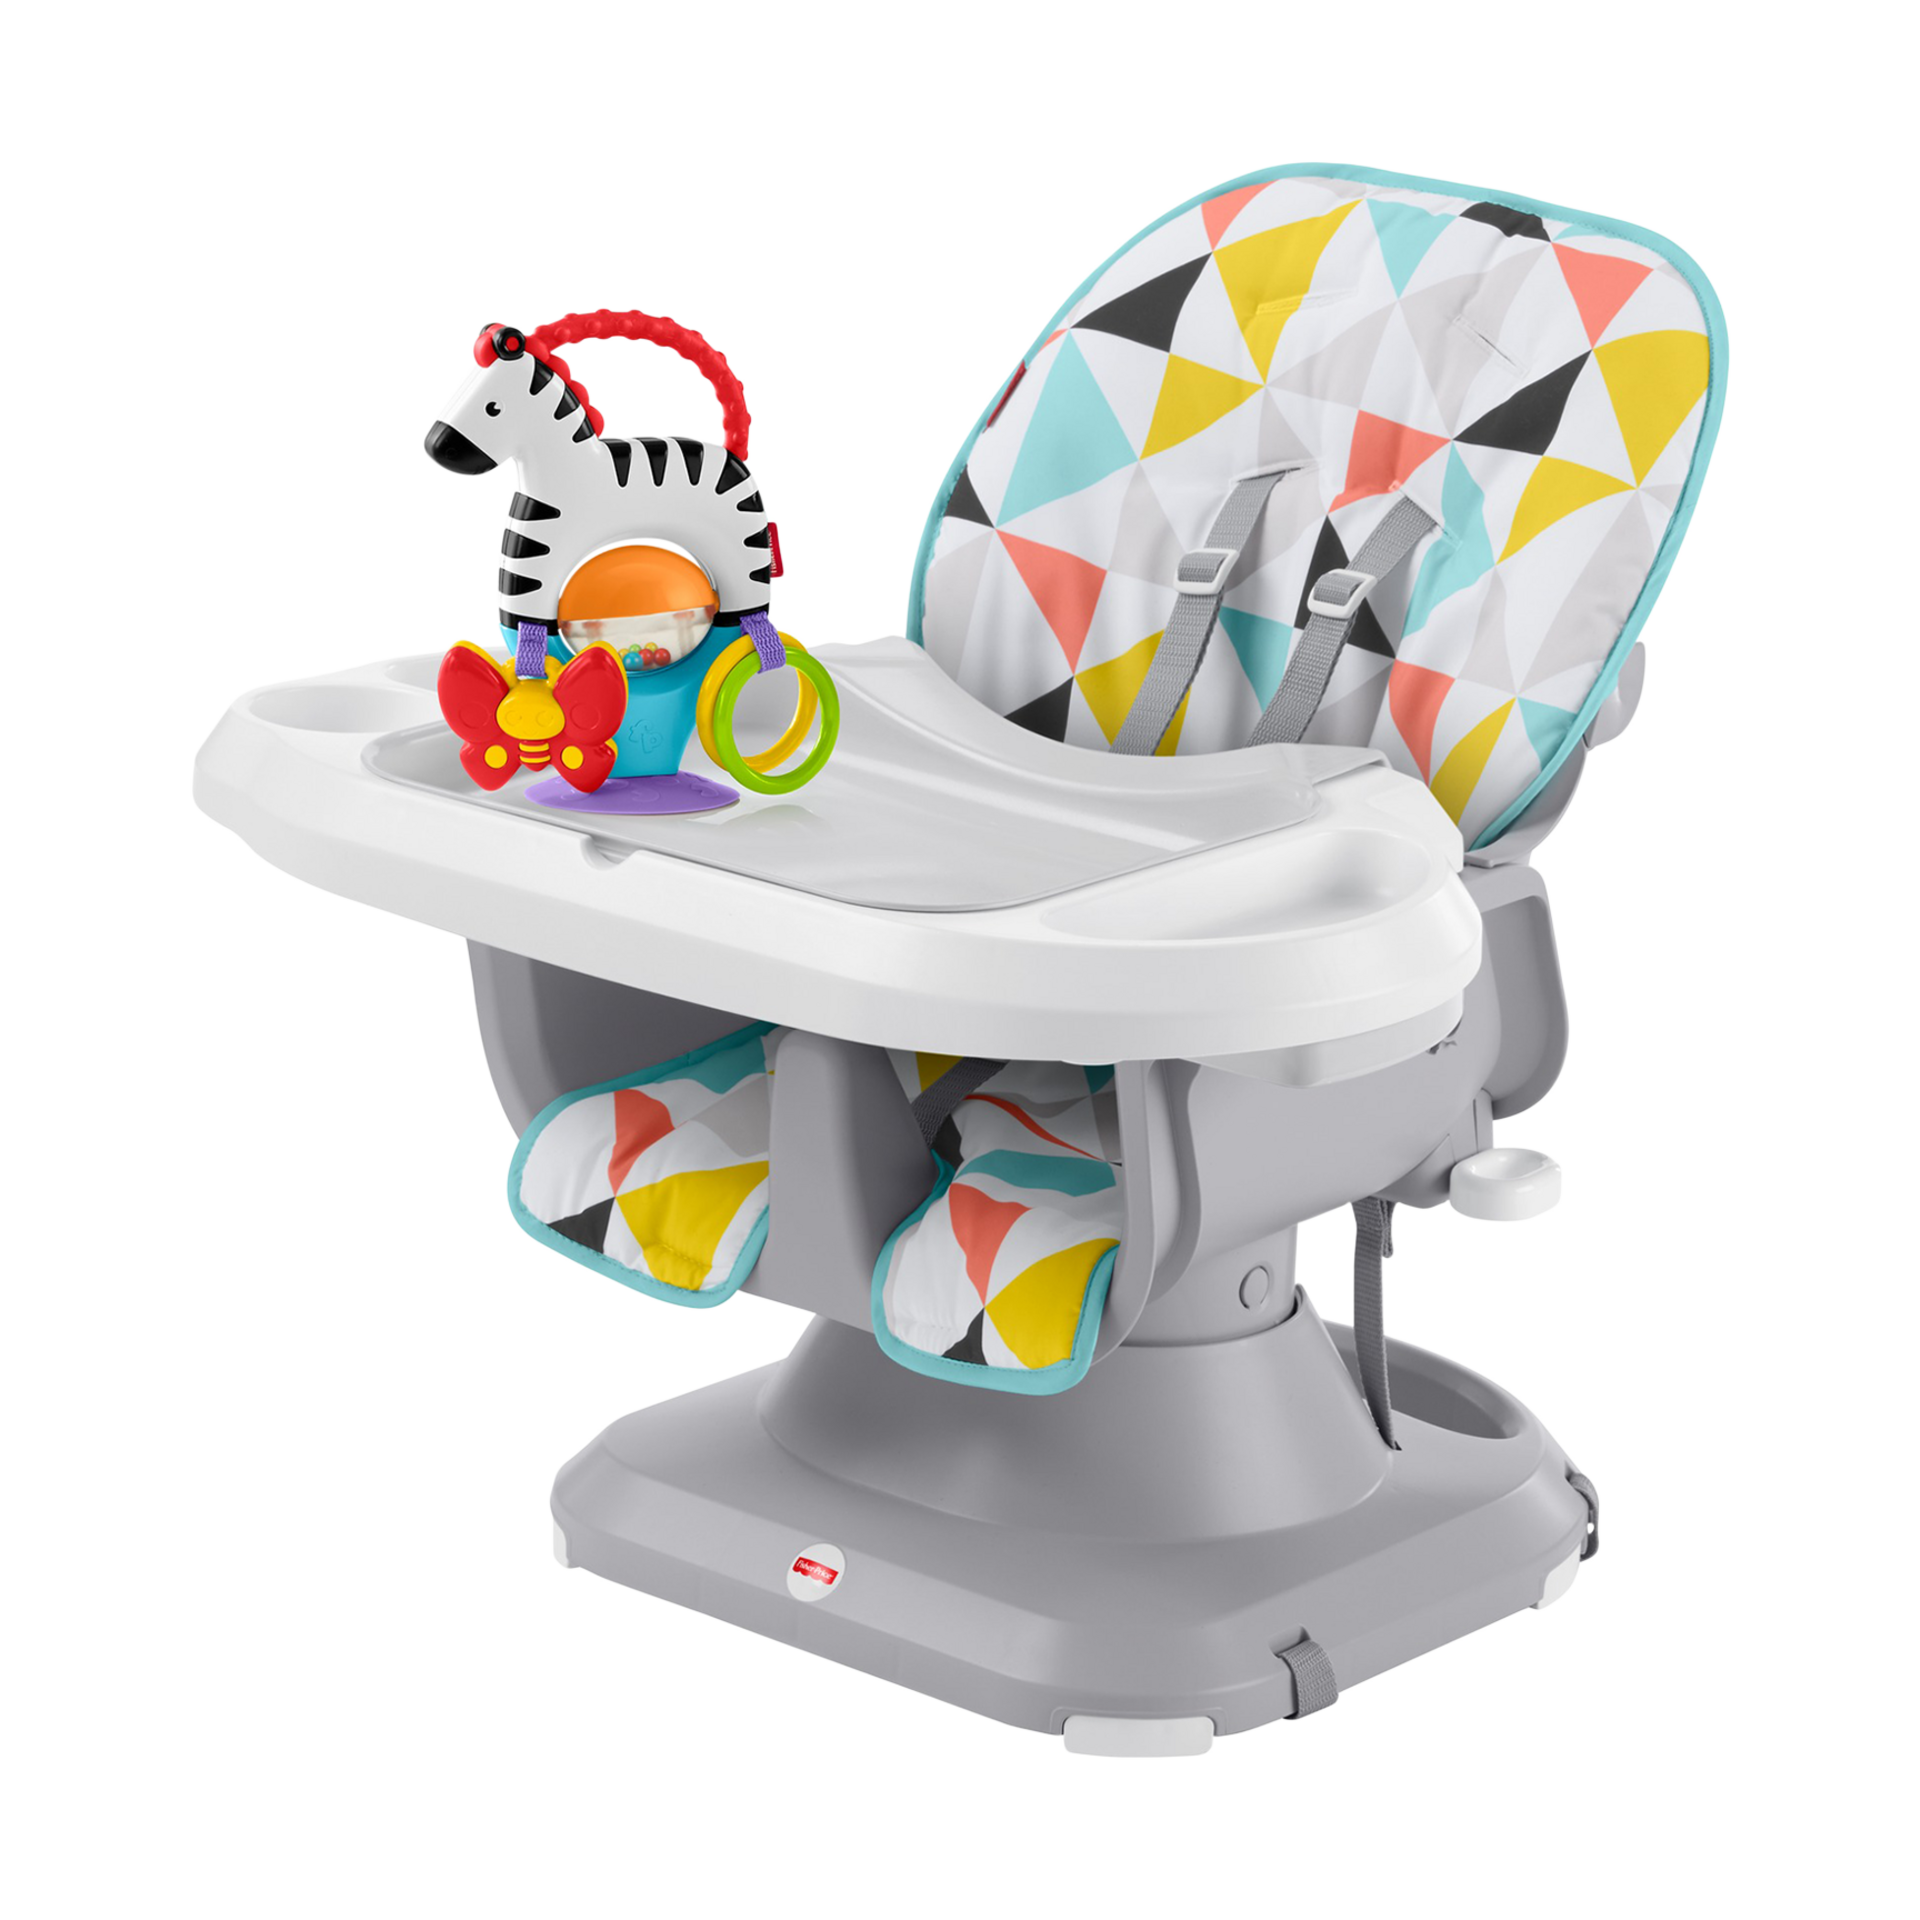 ROMYIX 4 in 1 Portable Baby High Chair Infant Feeding Seat Baby Dining Table Chair Height Adjustable